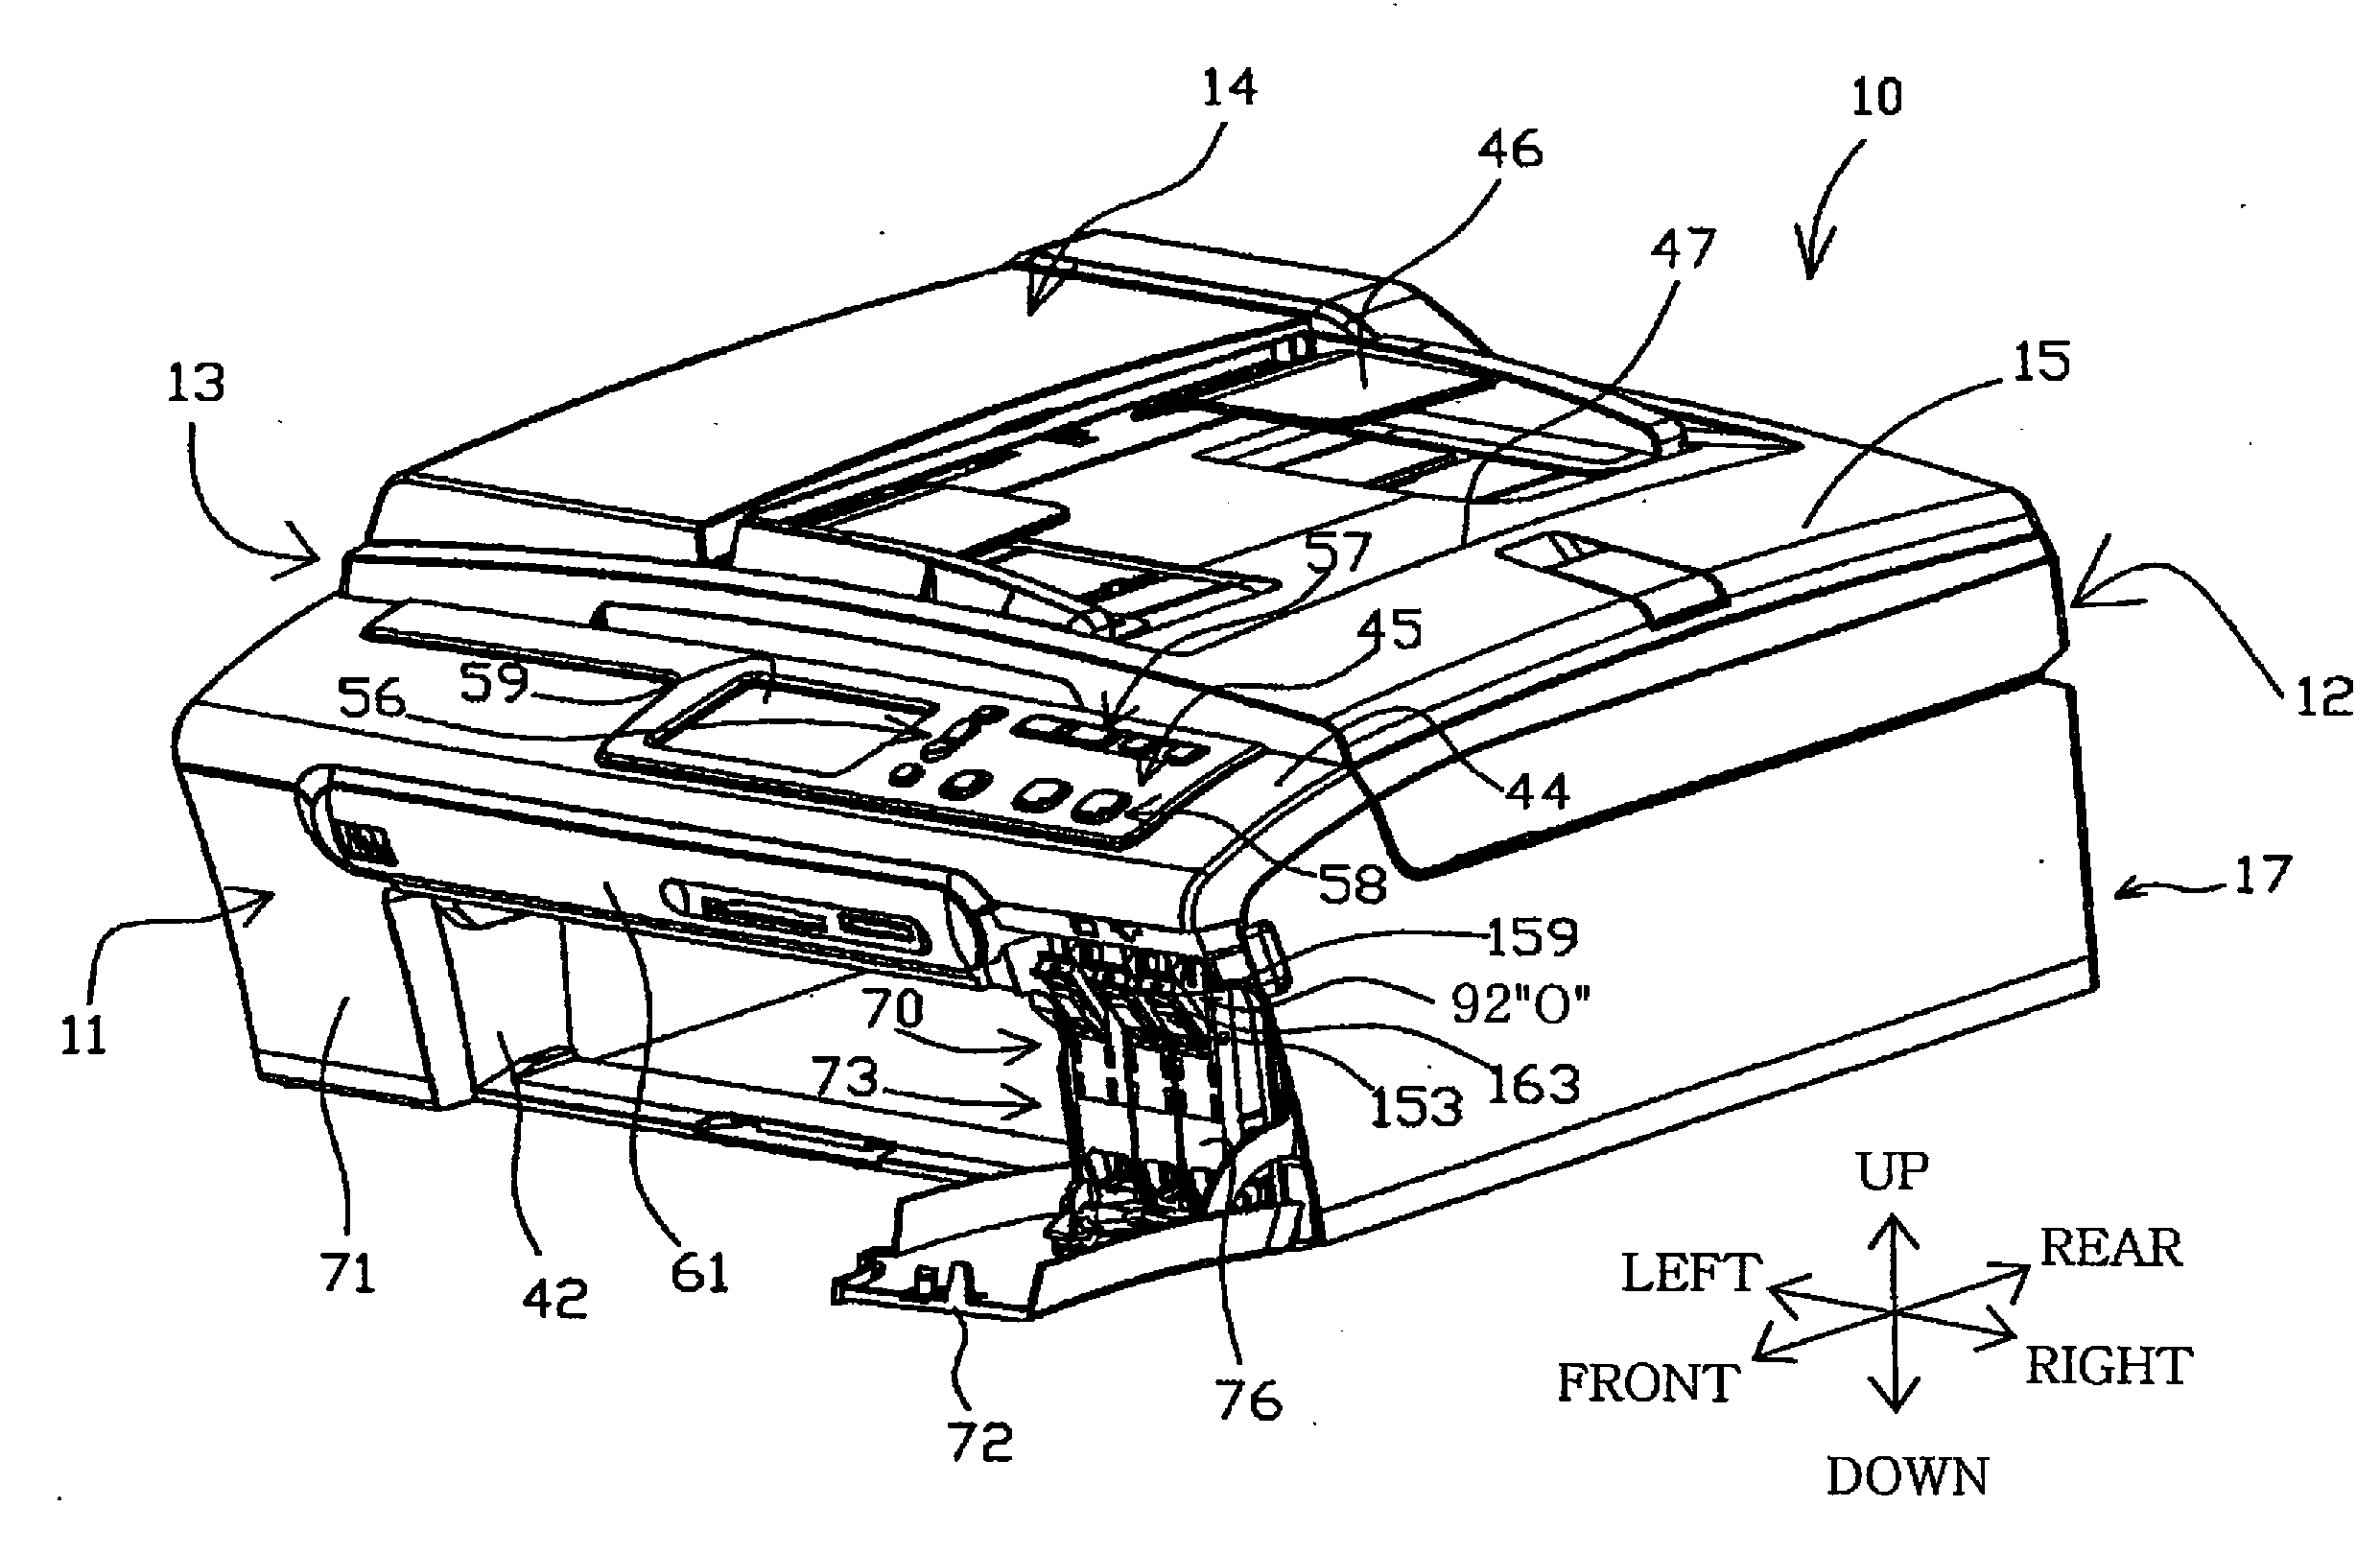 Ink cartridge holding device